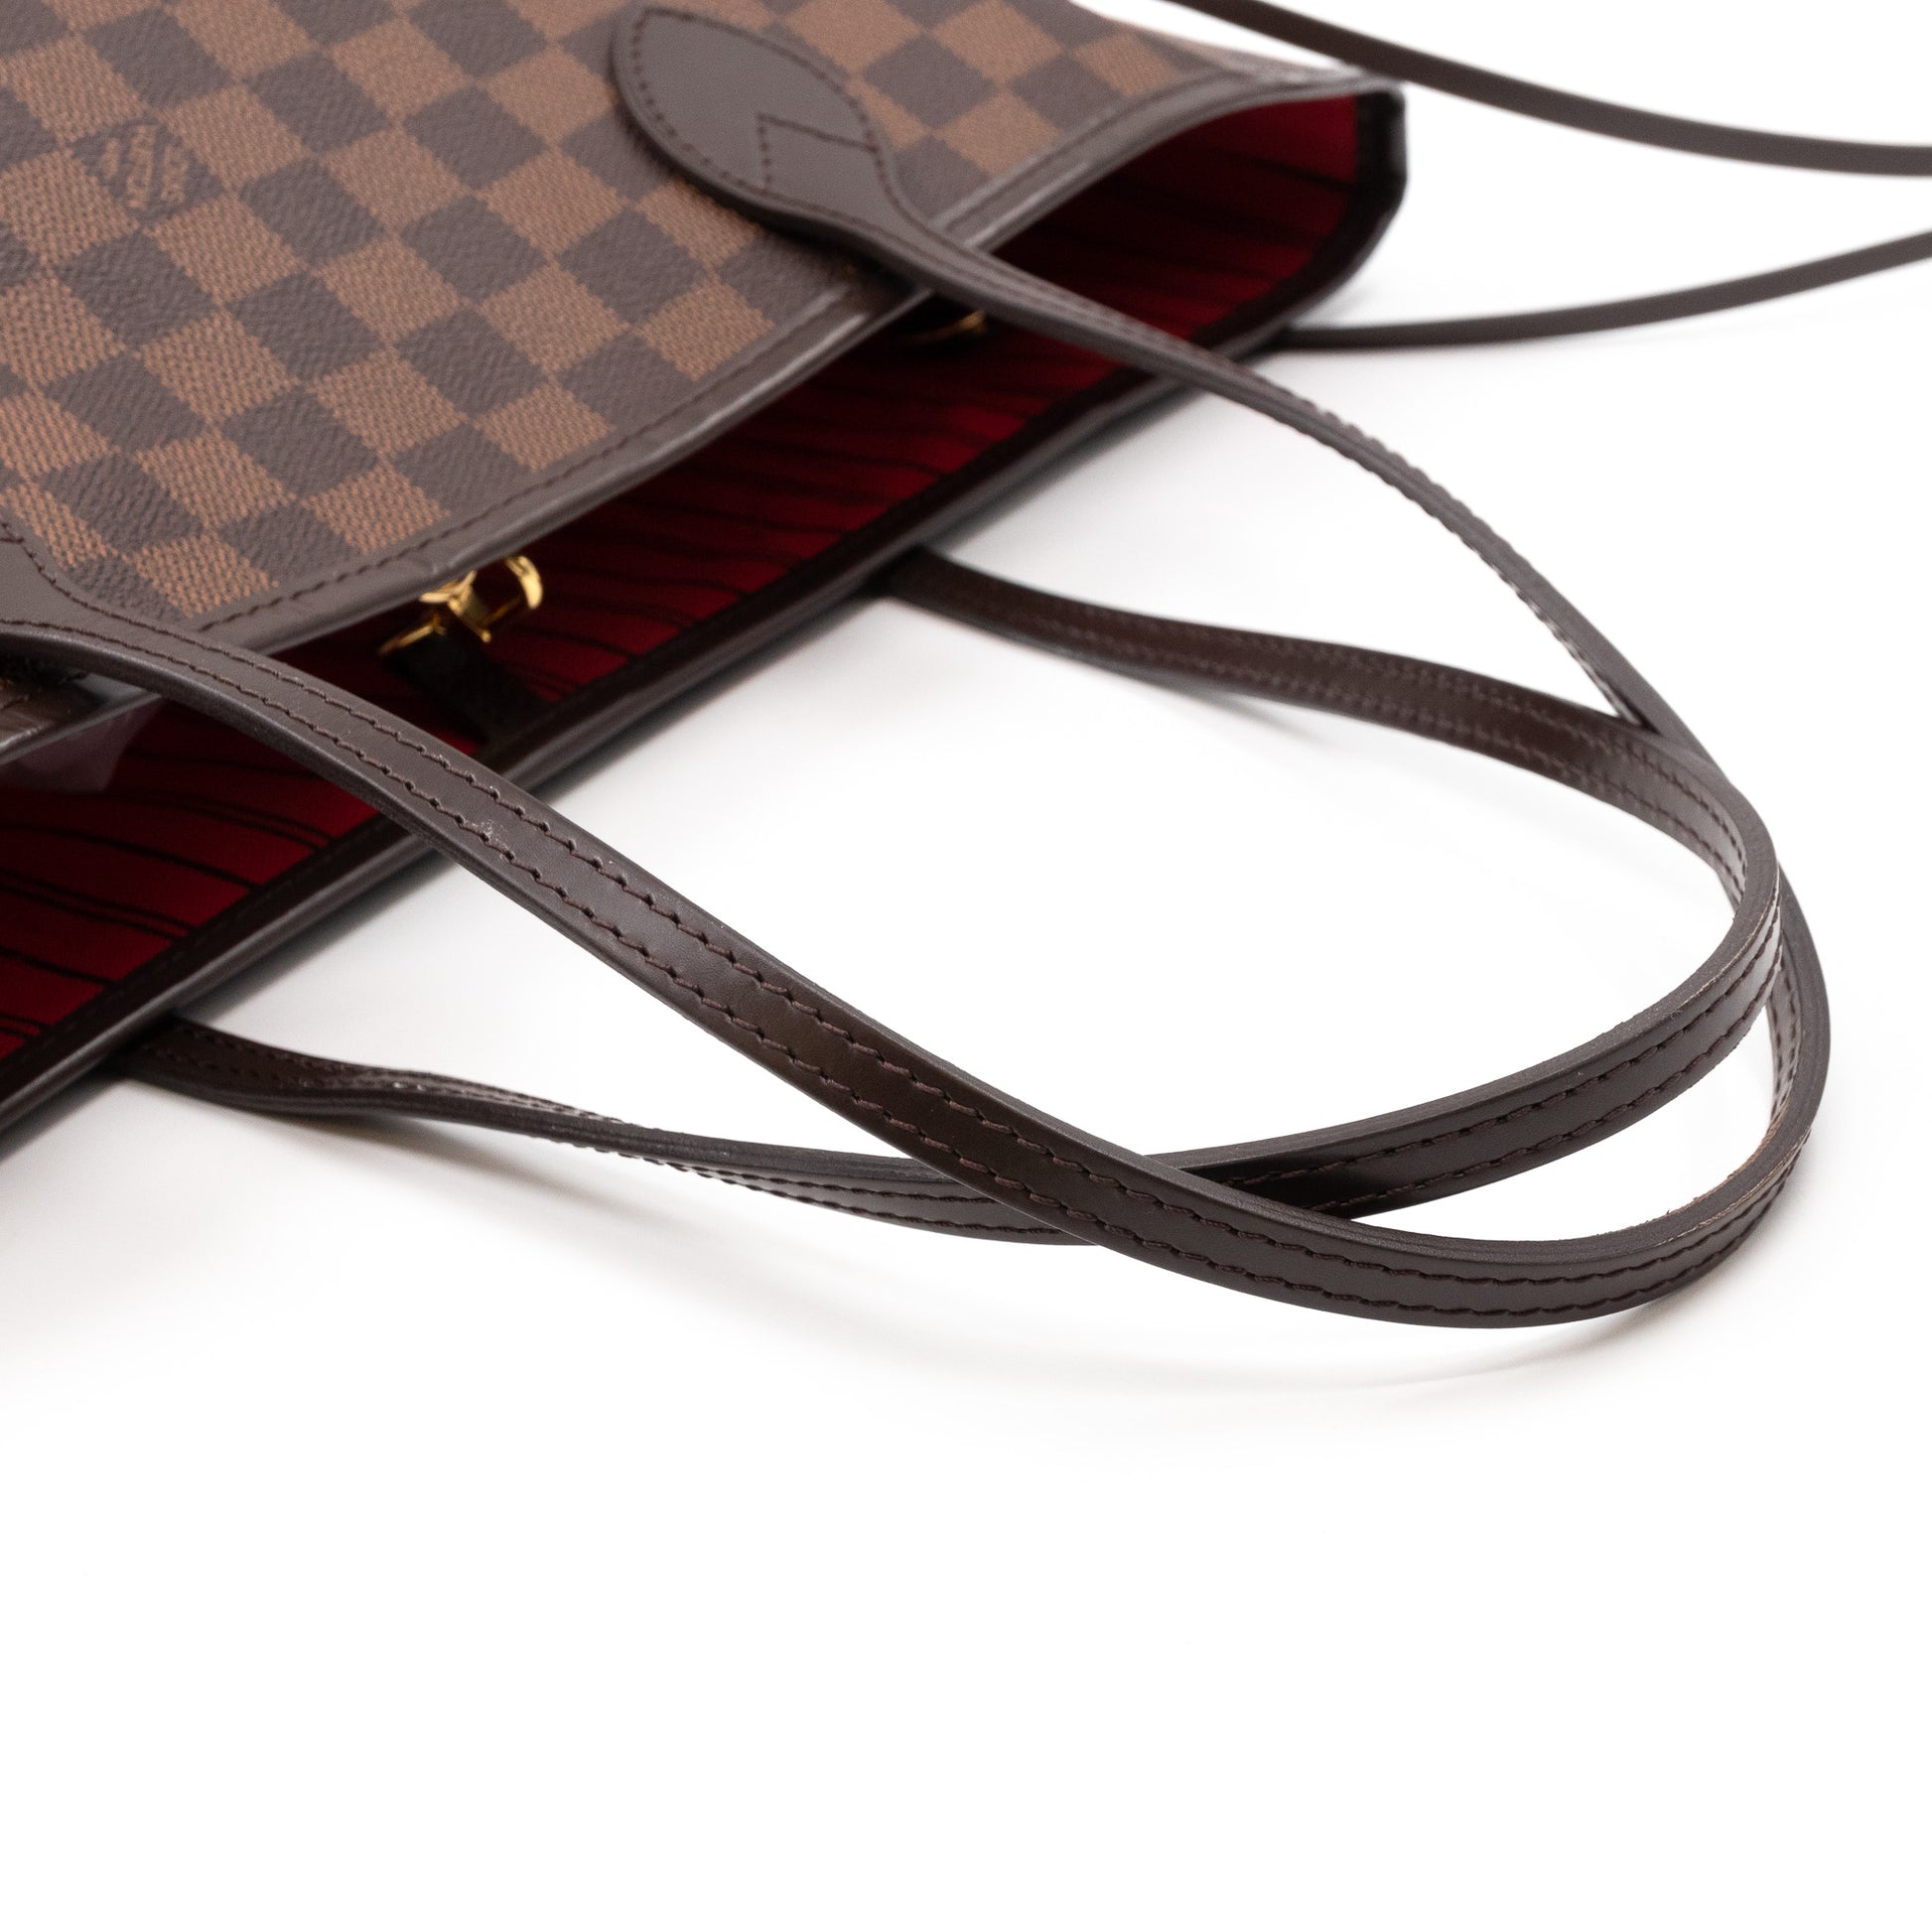 Accessories for Louis Vuitton Neverfull - Mimi Zackery